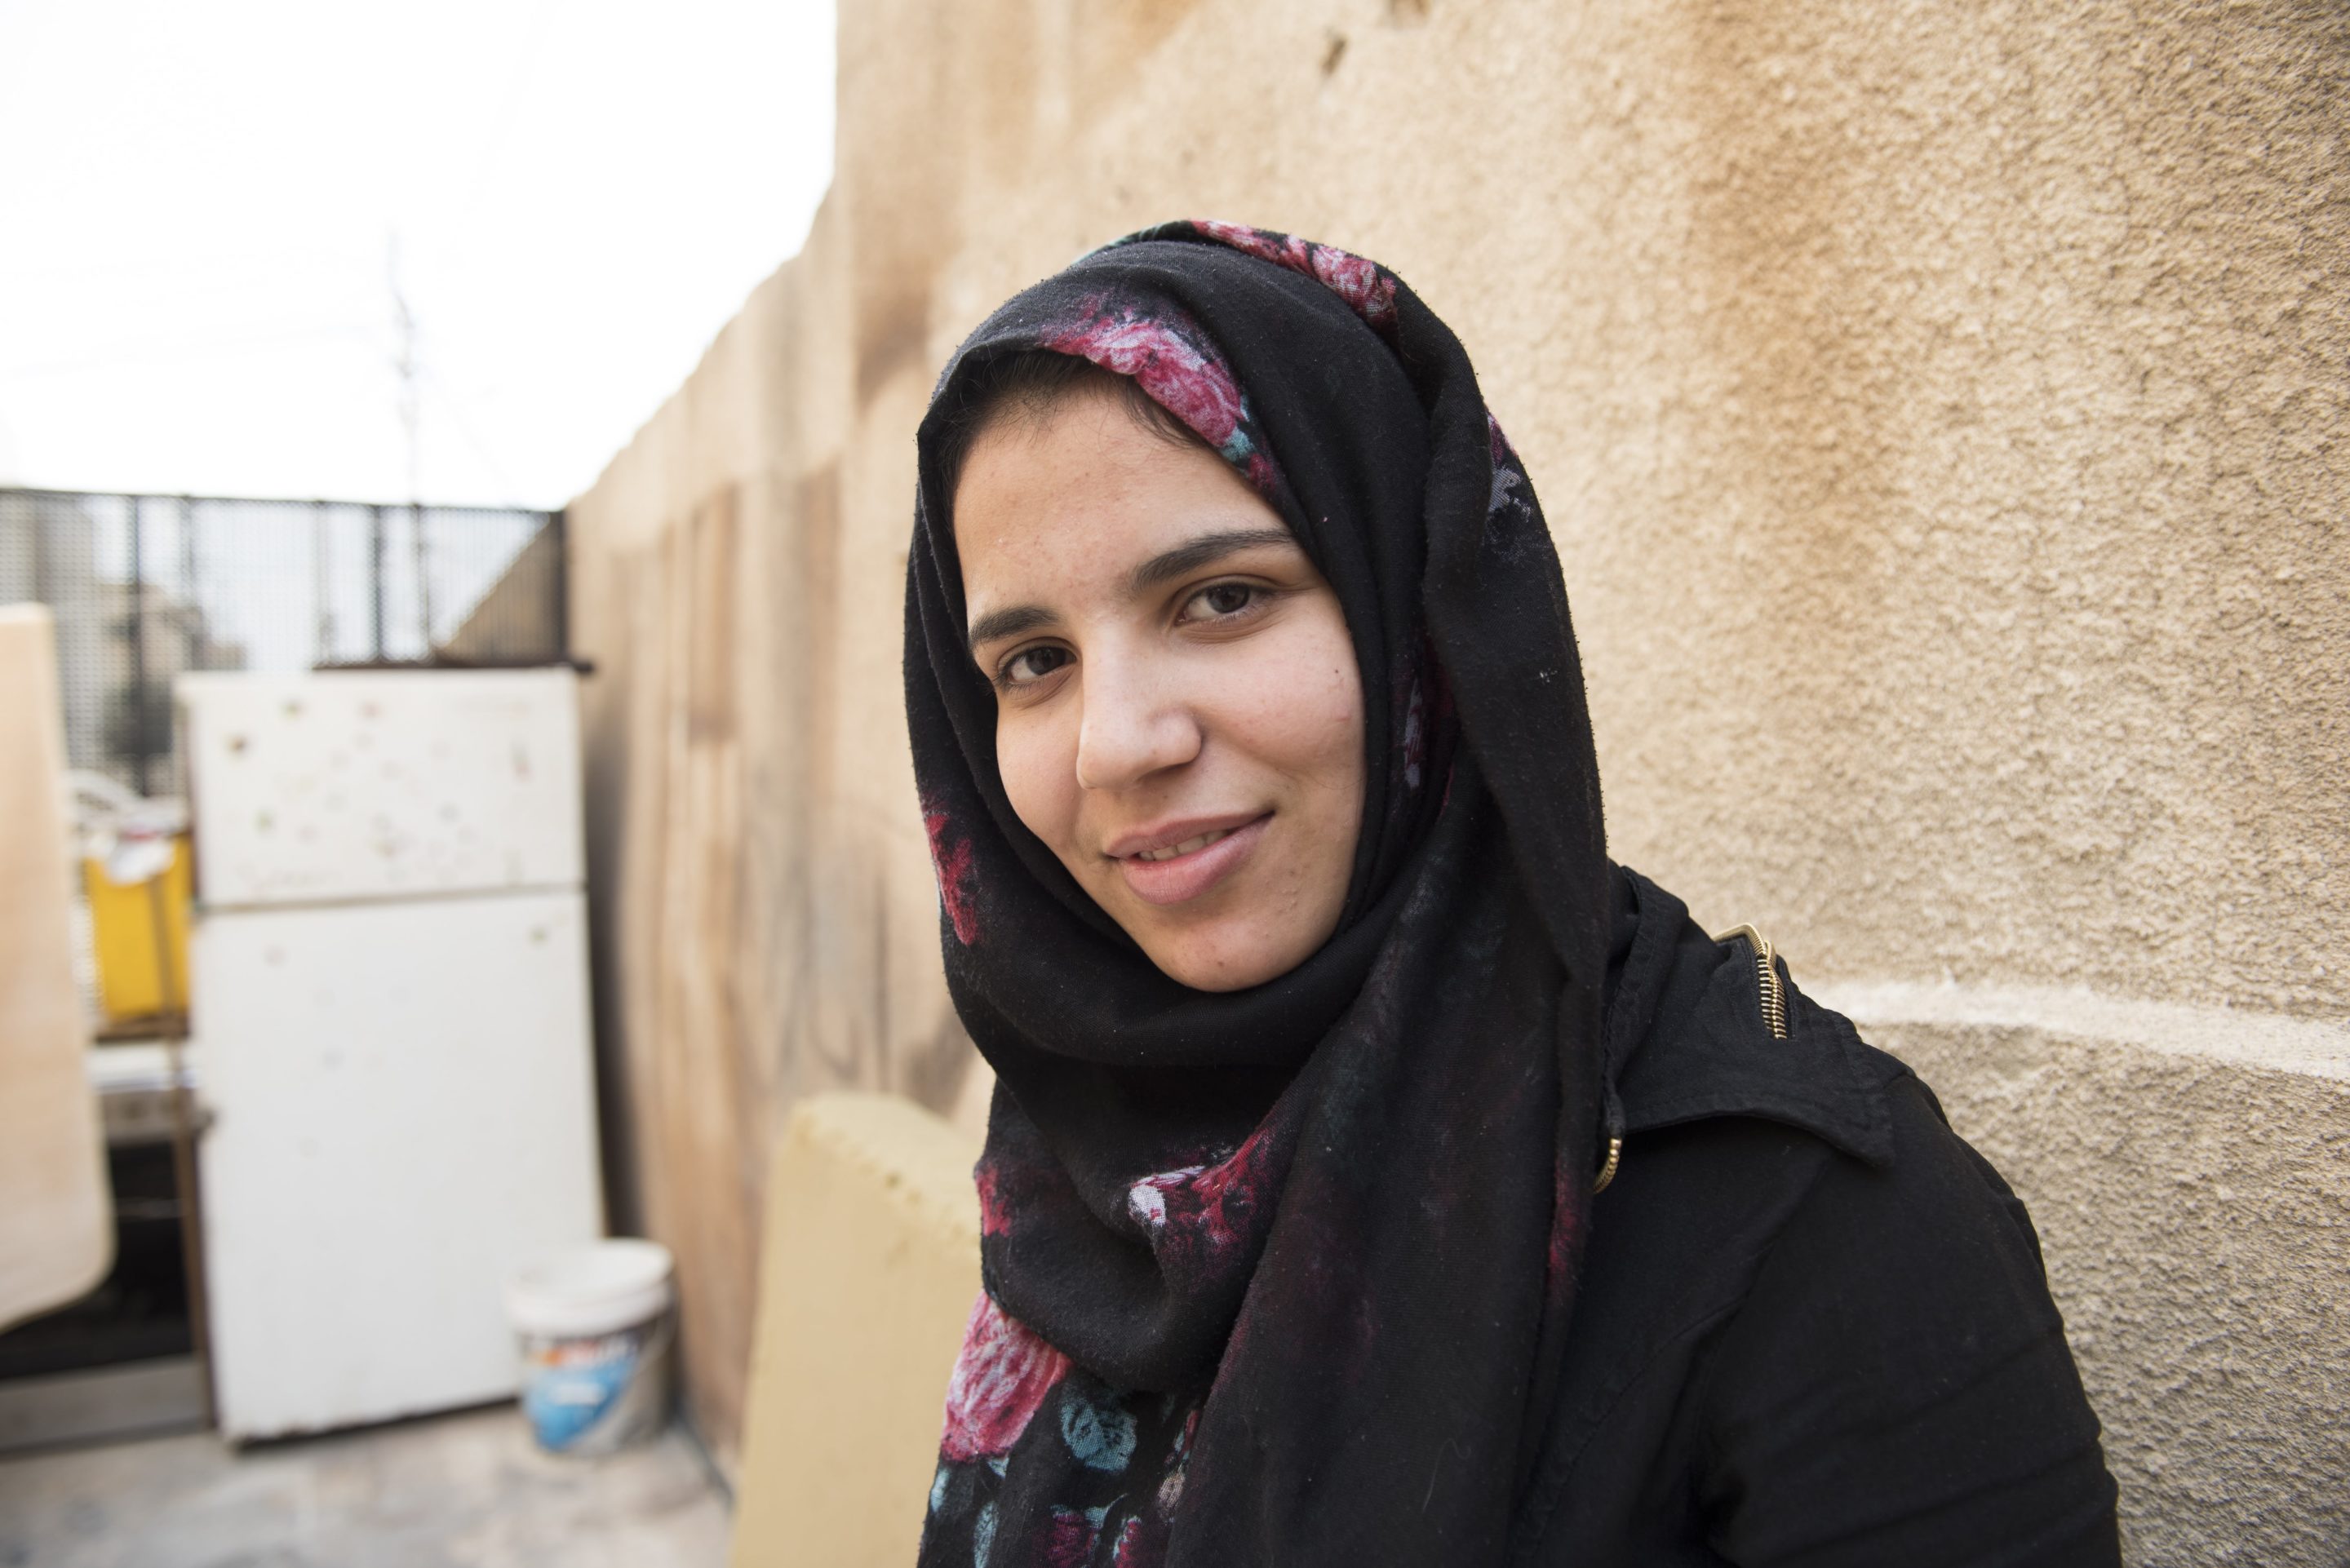 A woman in a black hijab smiles for the camera